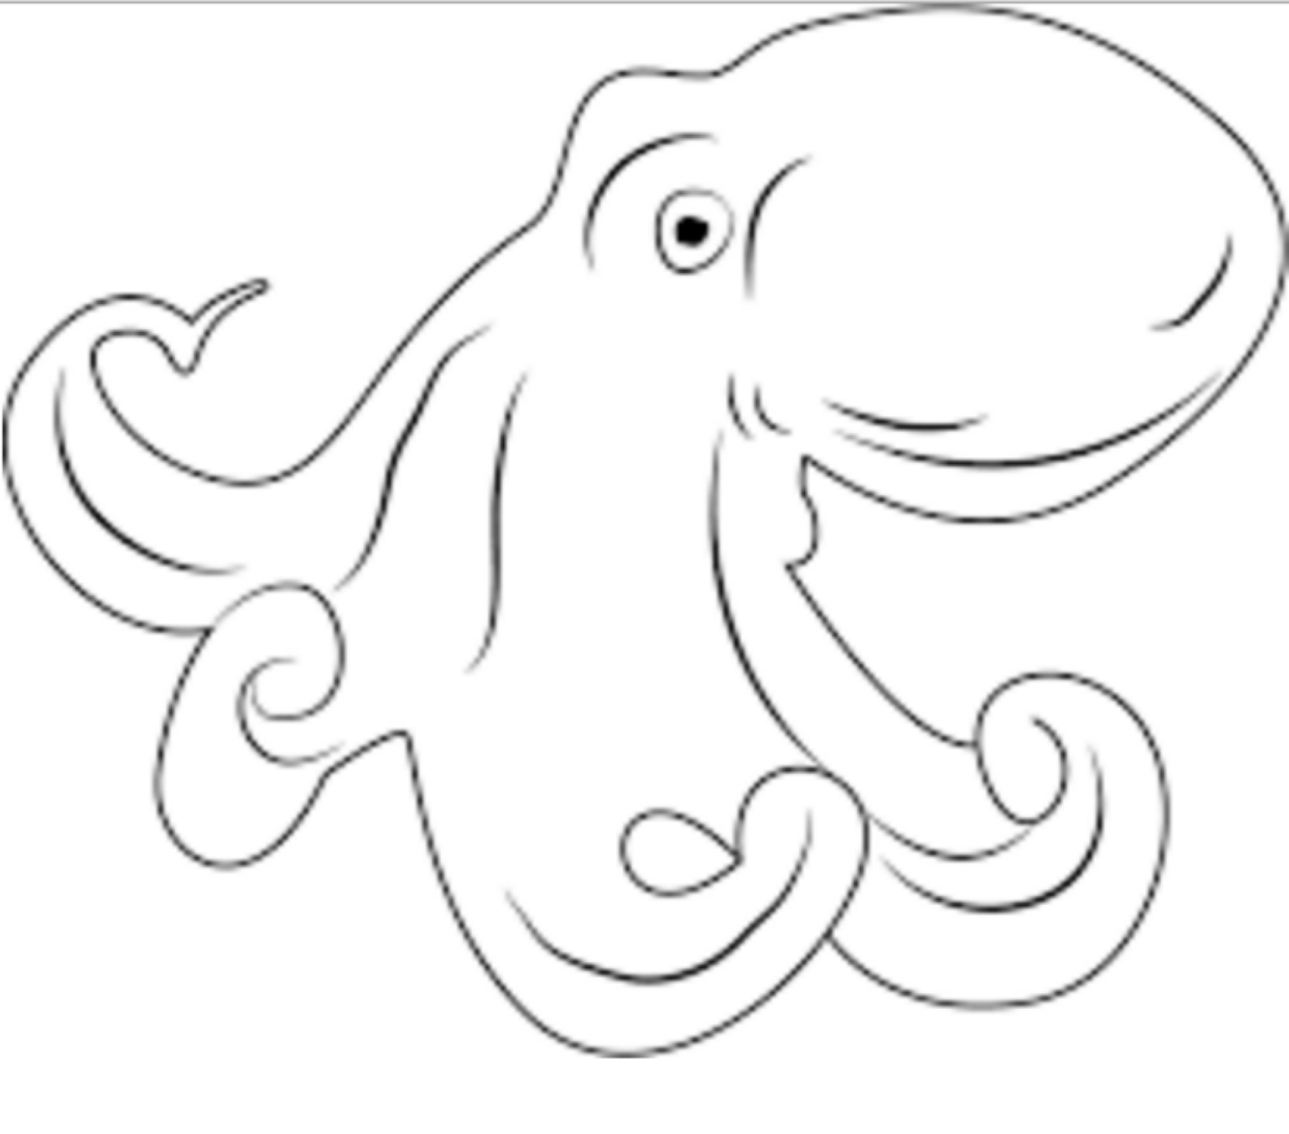 Drawing 2 from Octopus coloring page to print and coloring